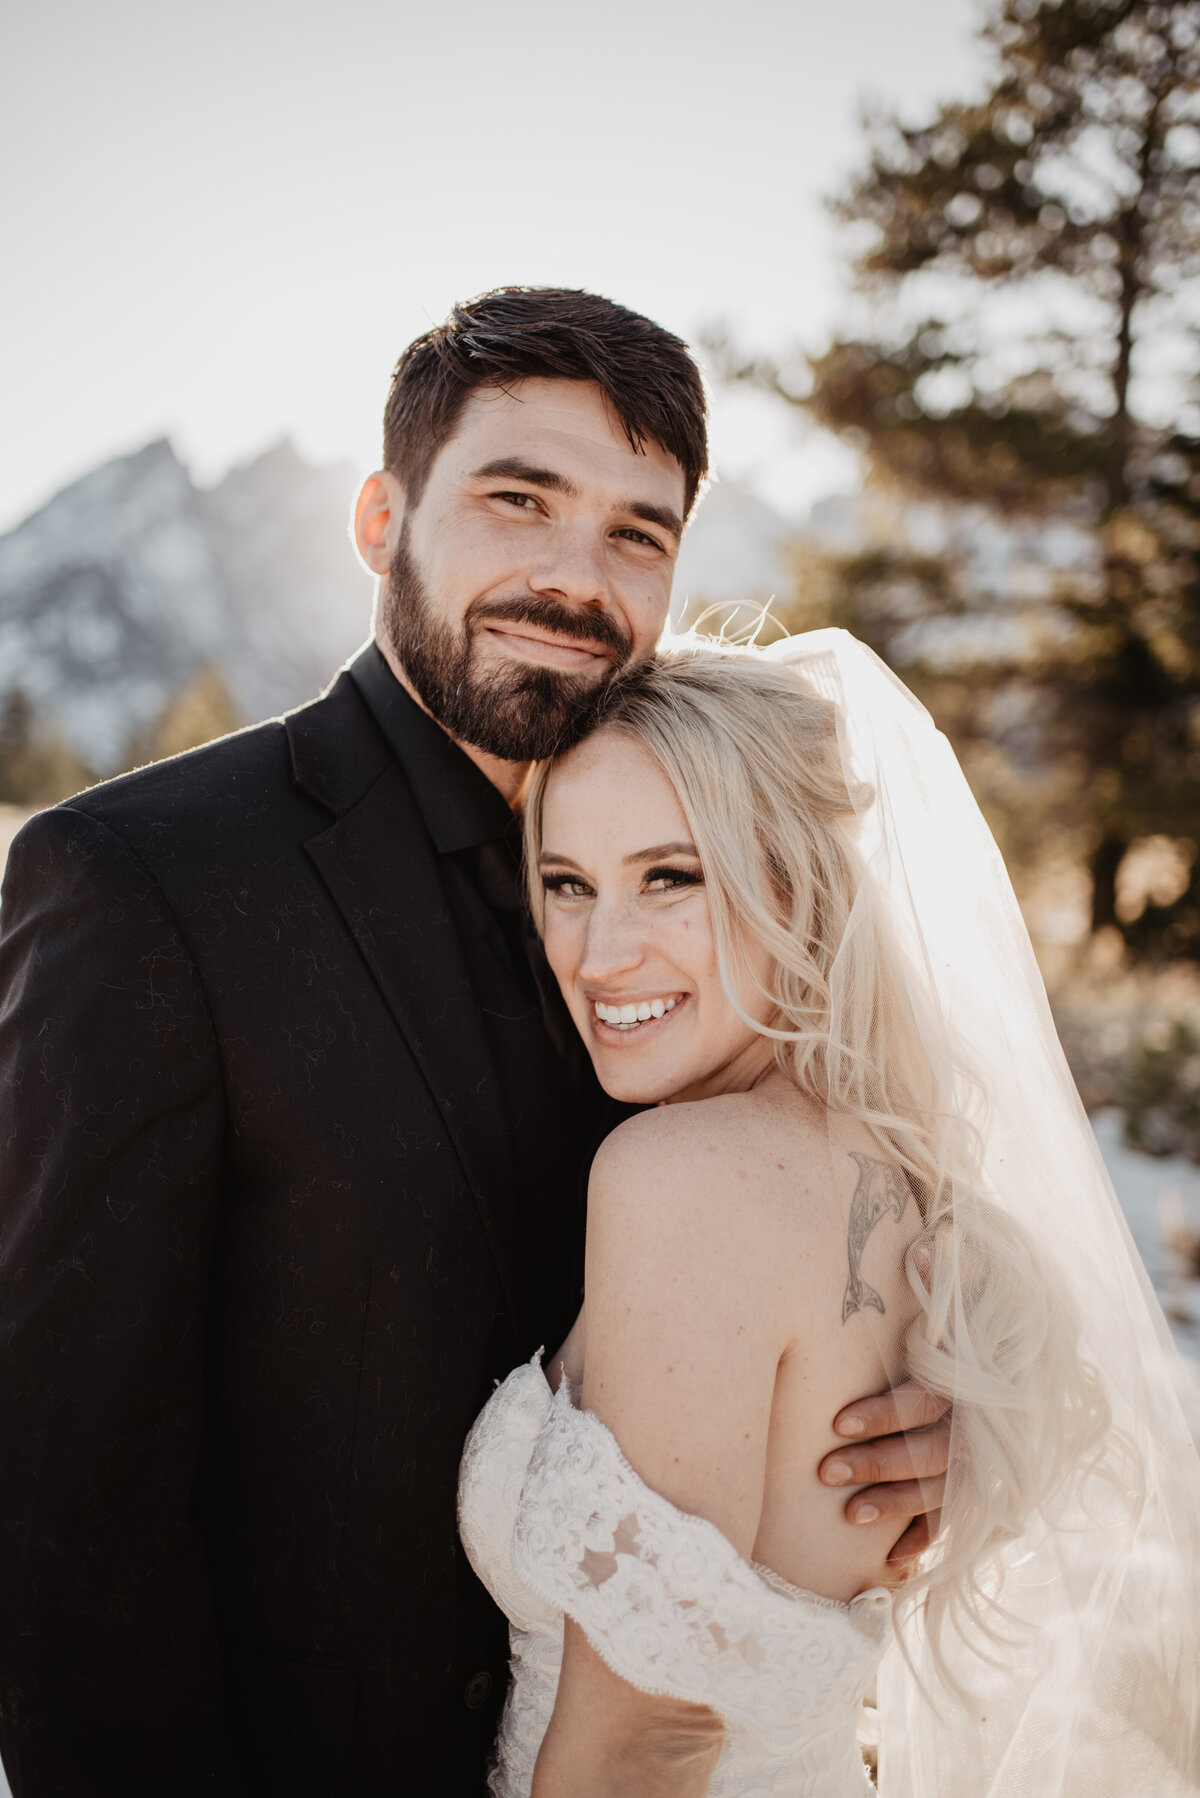 Jackson Hole Photographers capture couple smiling and hugging after elopement